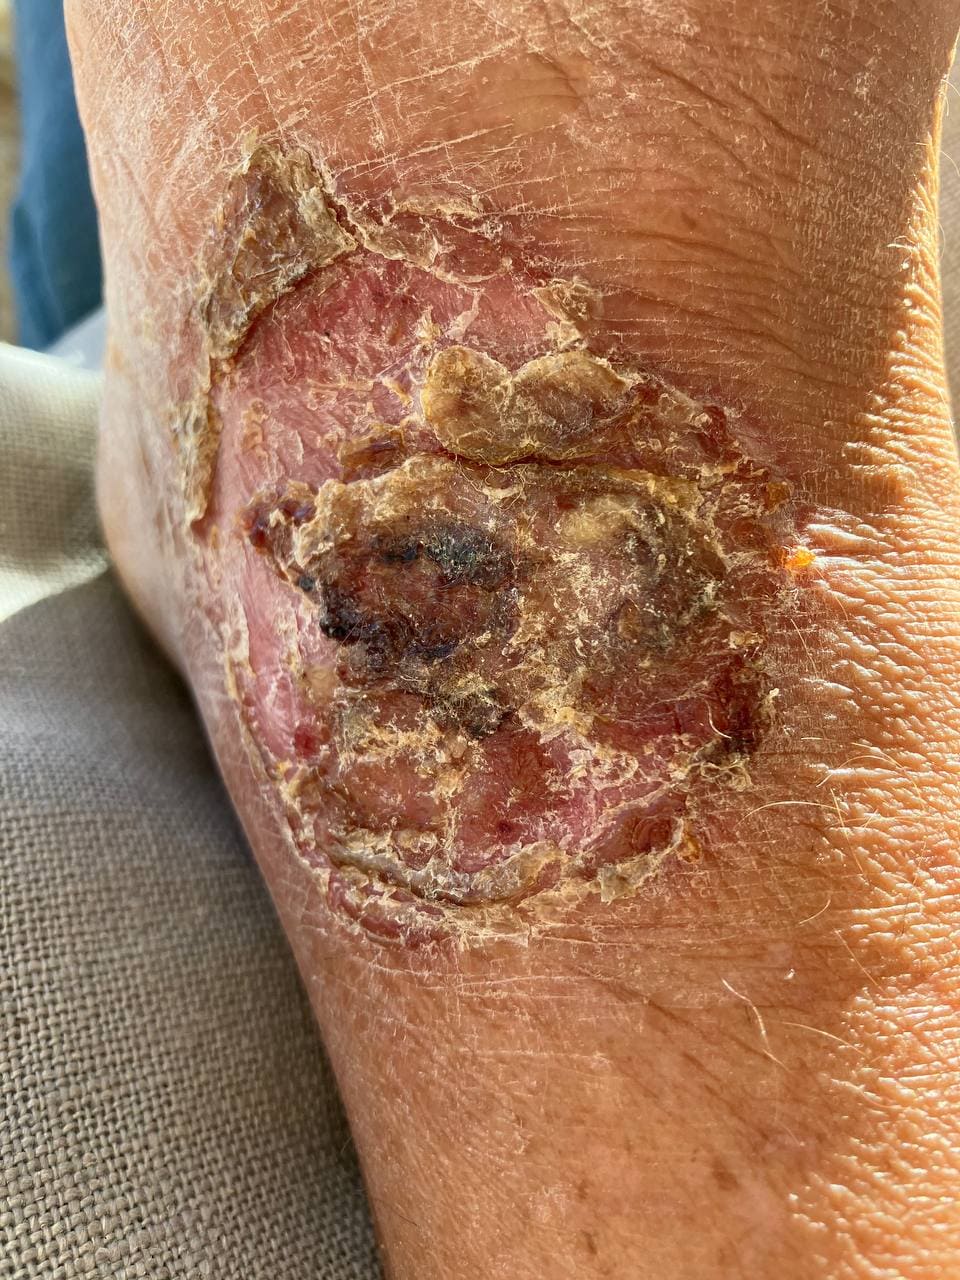 Leg ulcers: squamous epithelium and connective tissue in hanging healing.